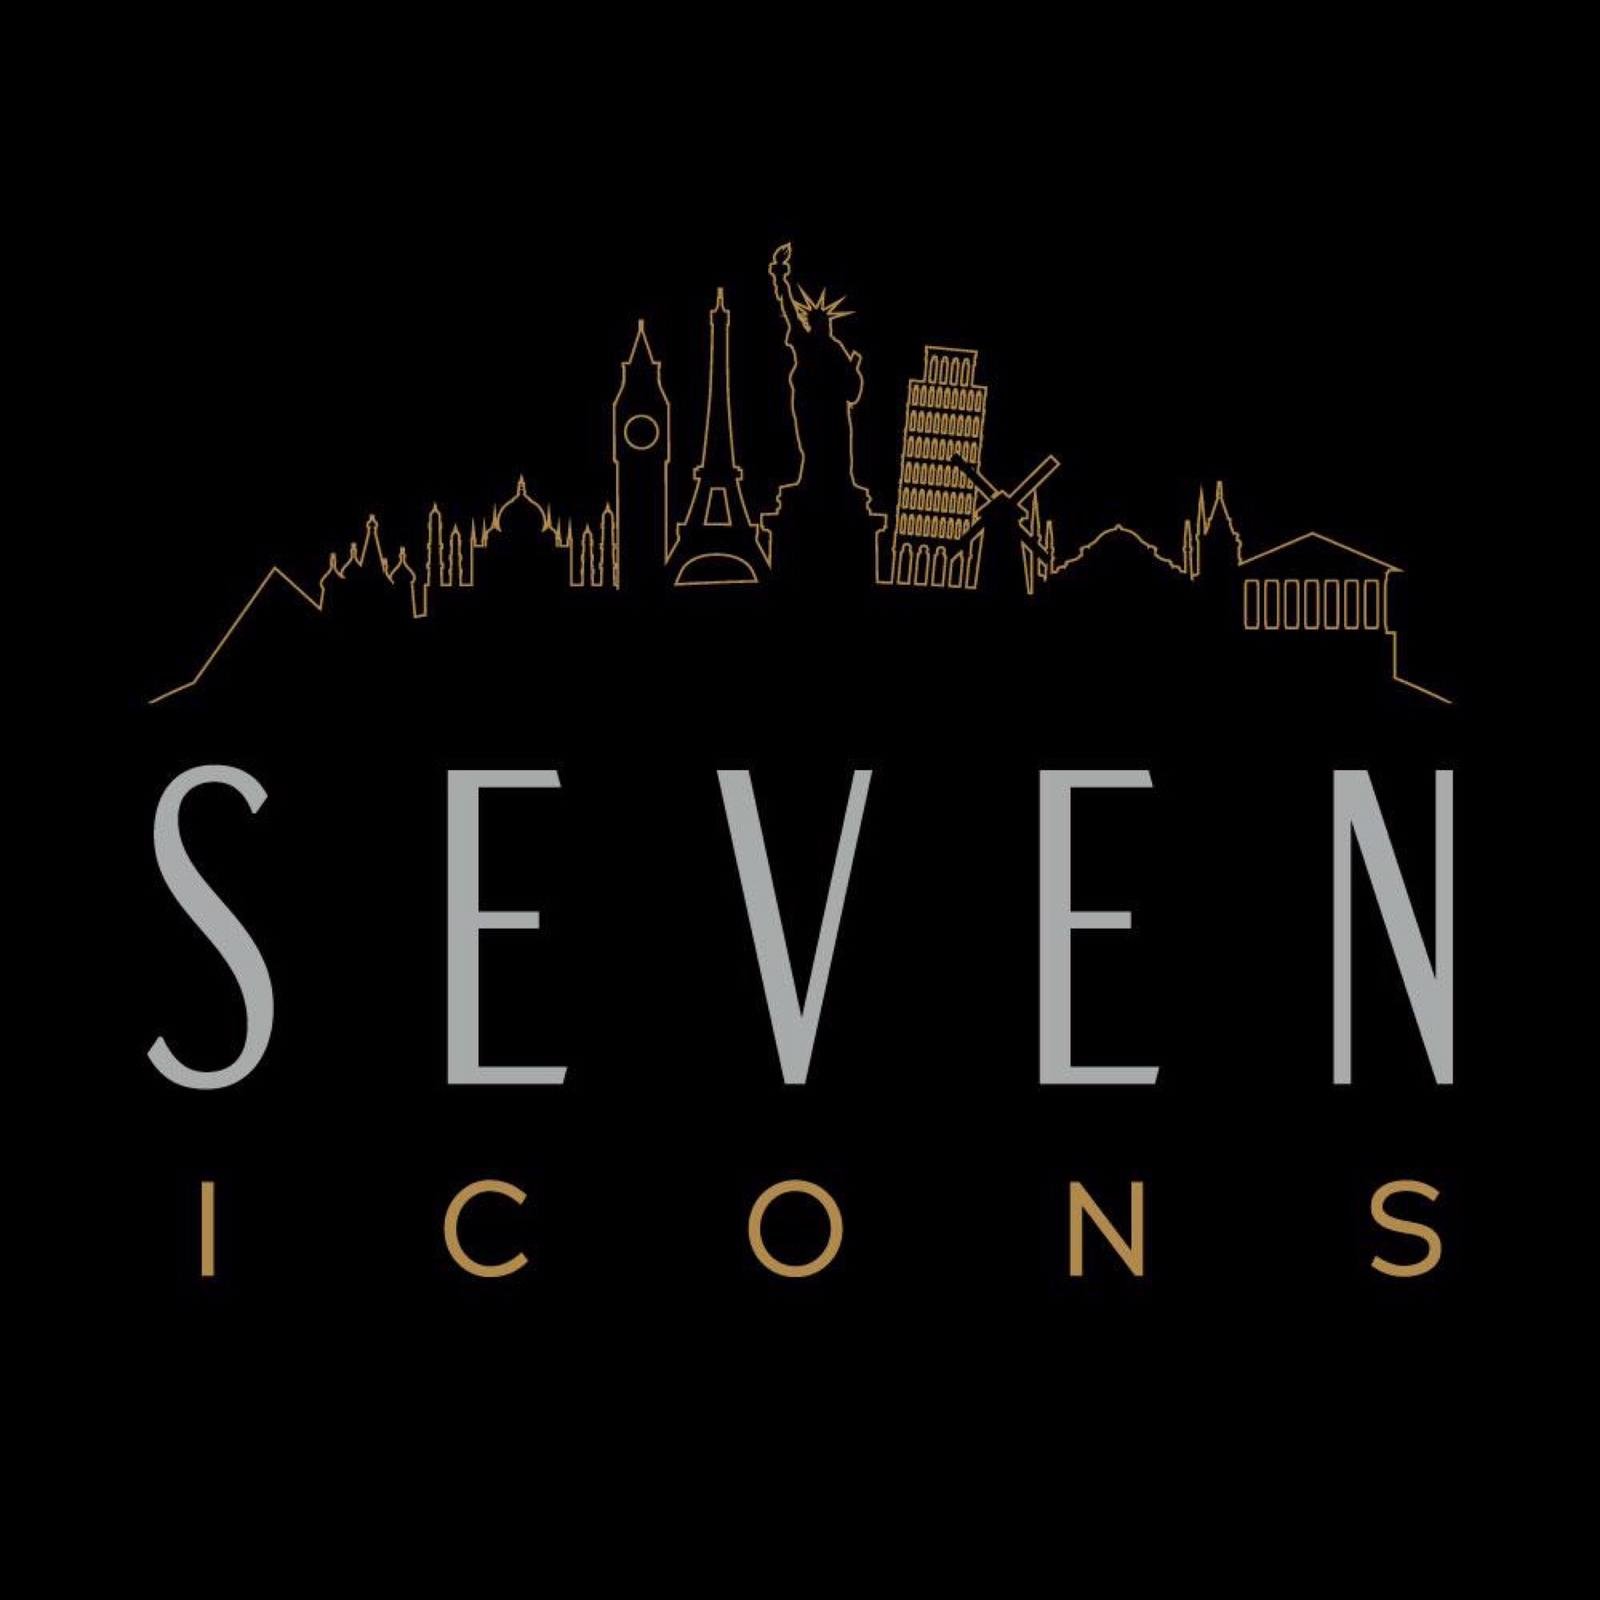 Seven Icons Luxury Travel Provider. Member of The Travel Leaders Group and member of the Virtuoso network.